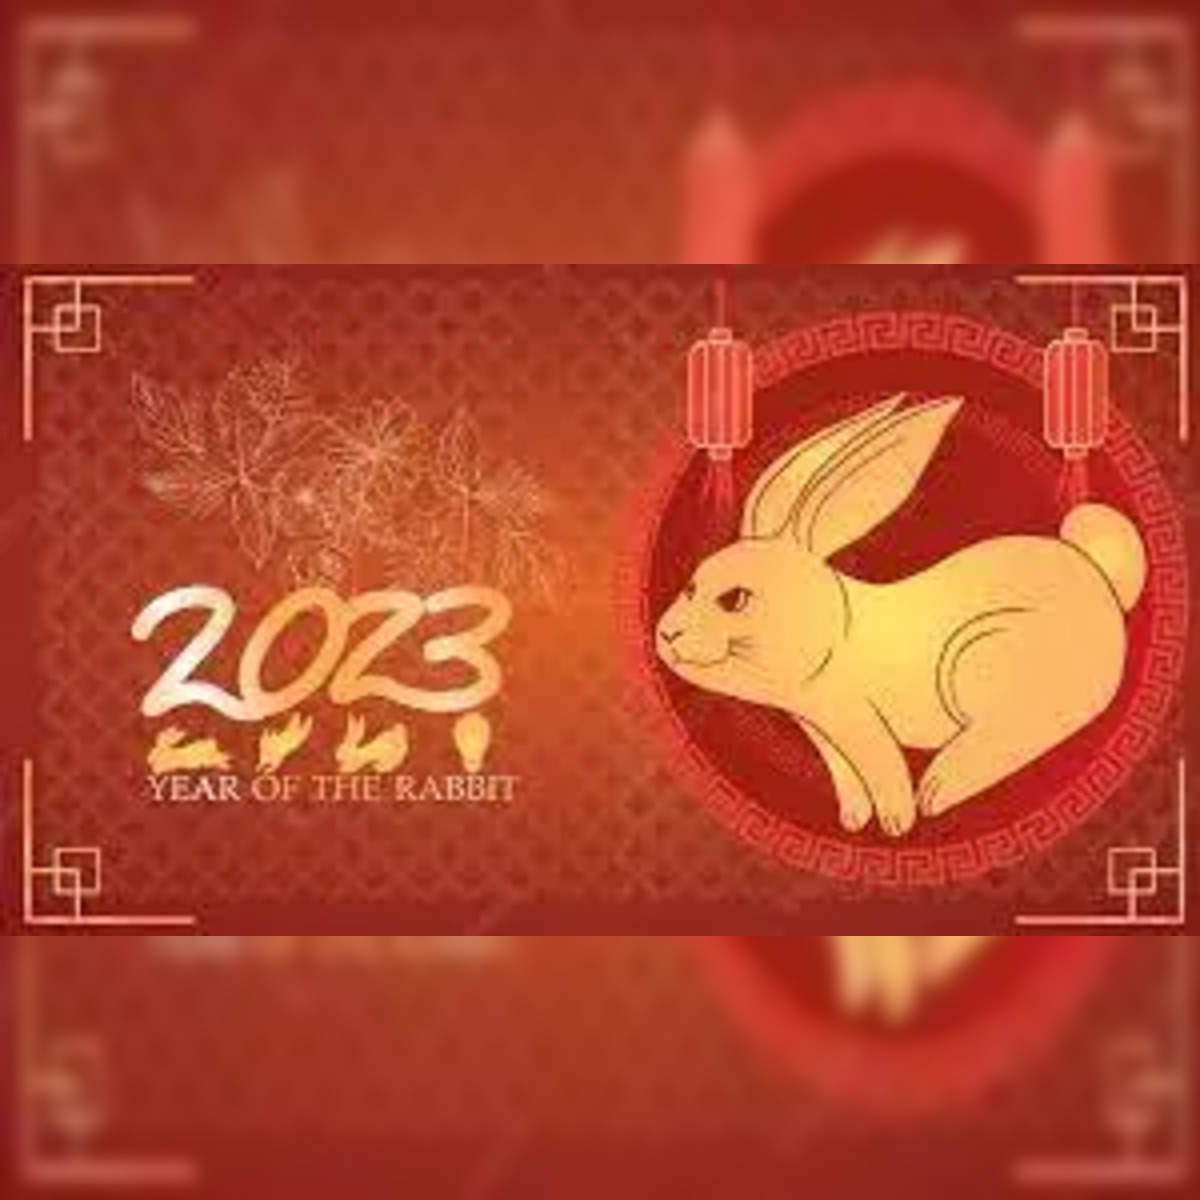 Chinese New Year messages: Chinese New Year 2023: 10 Heartfelt